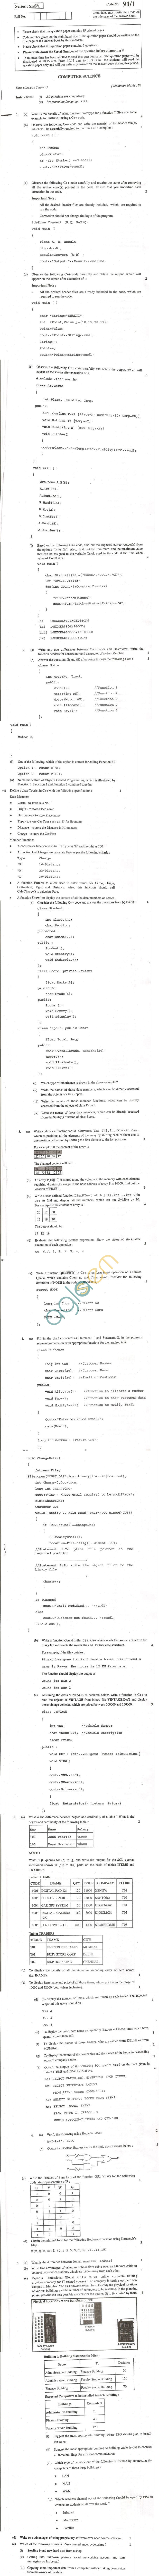 CBSE Board Exam 2013 Class XII Question Paper - Computer Science